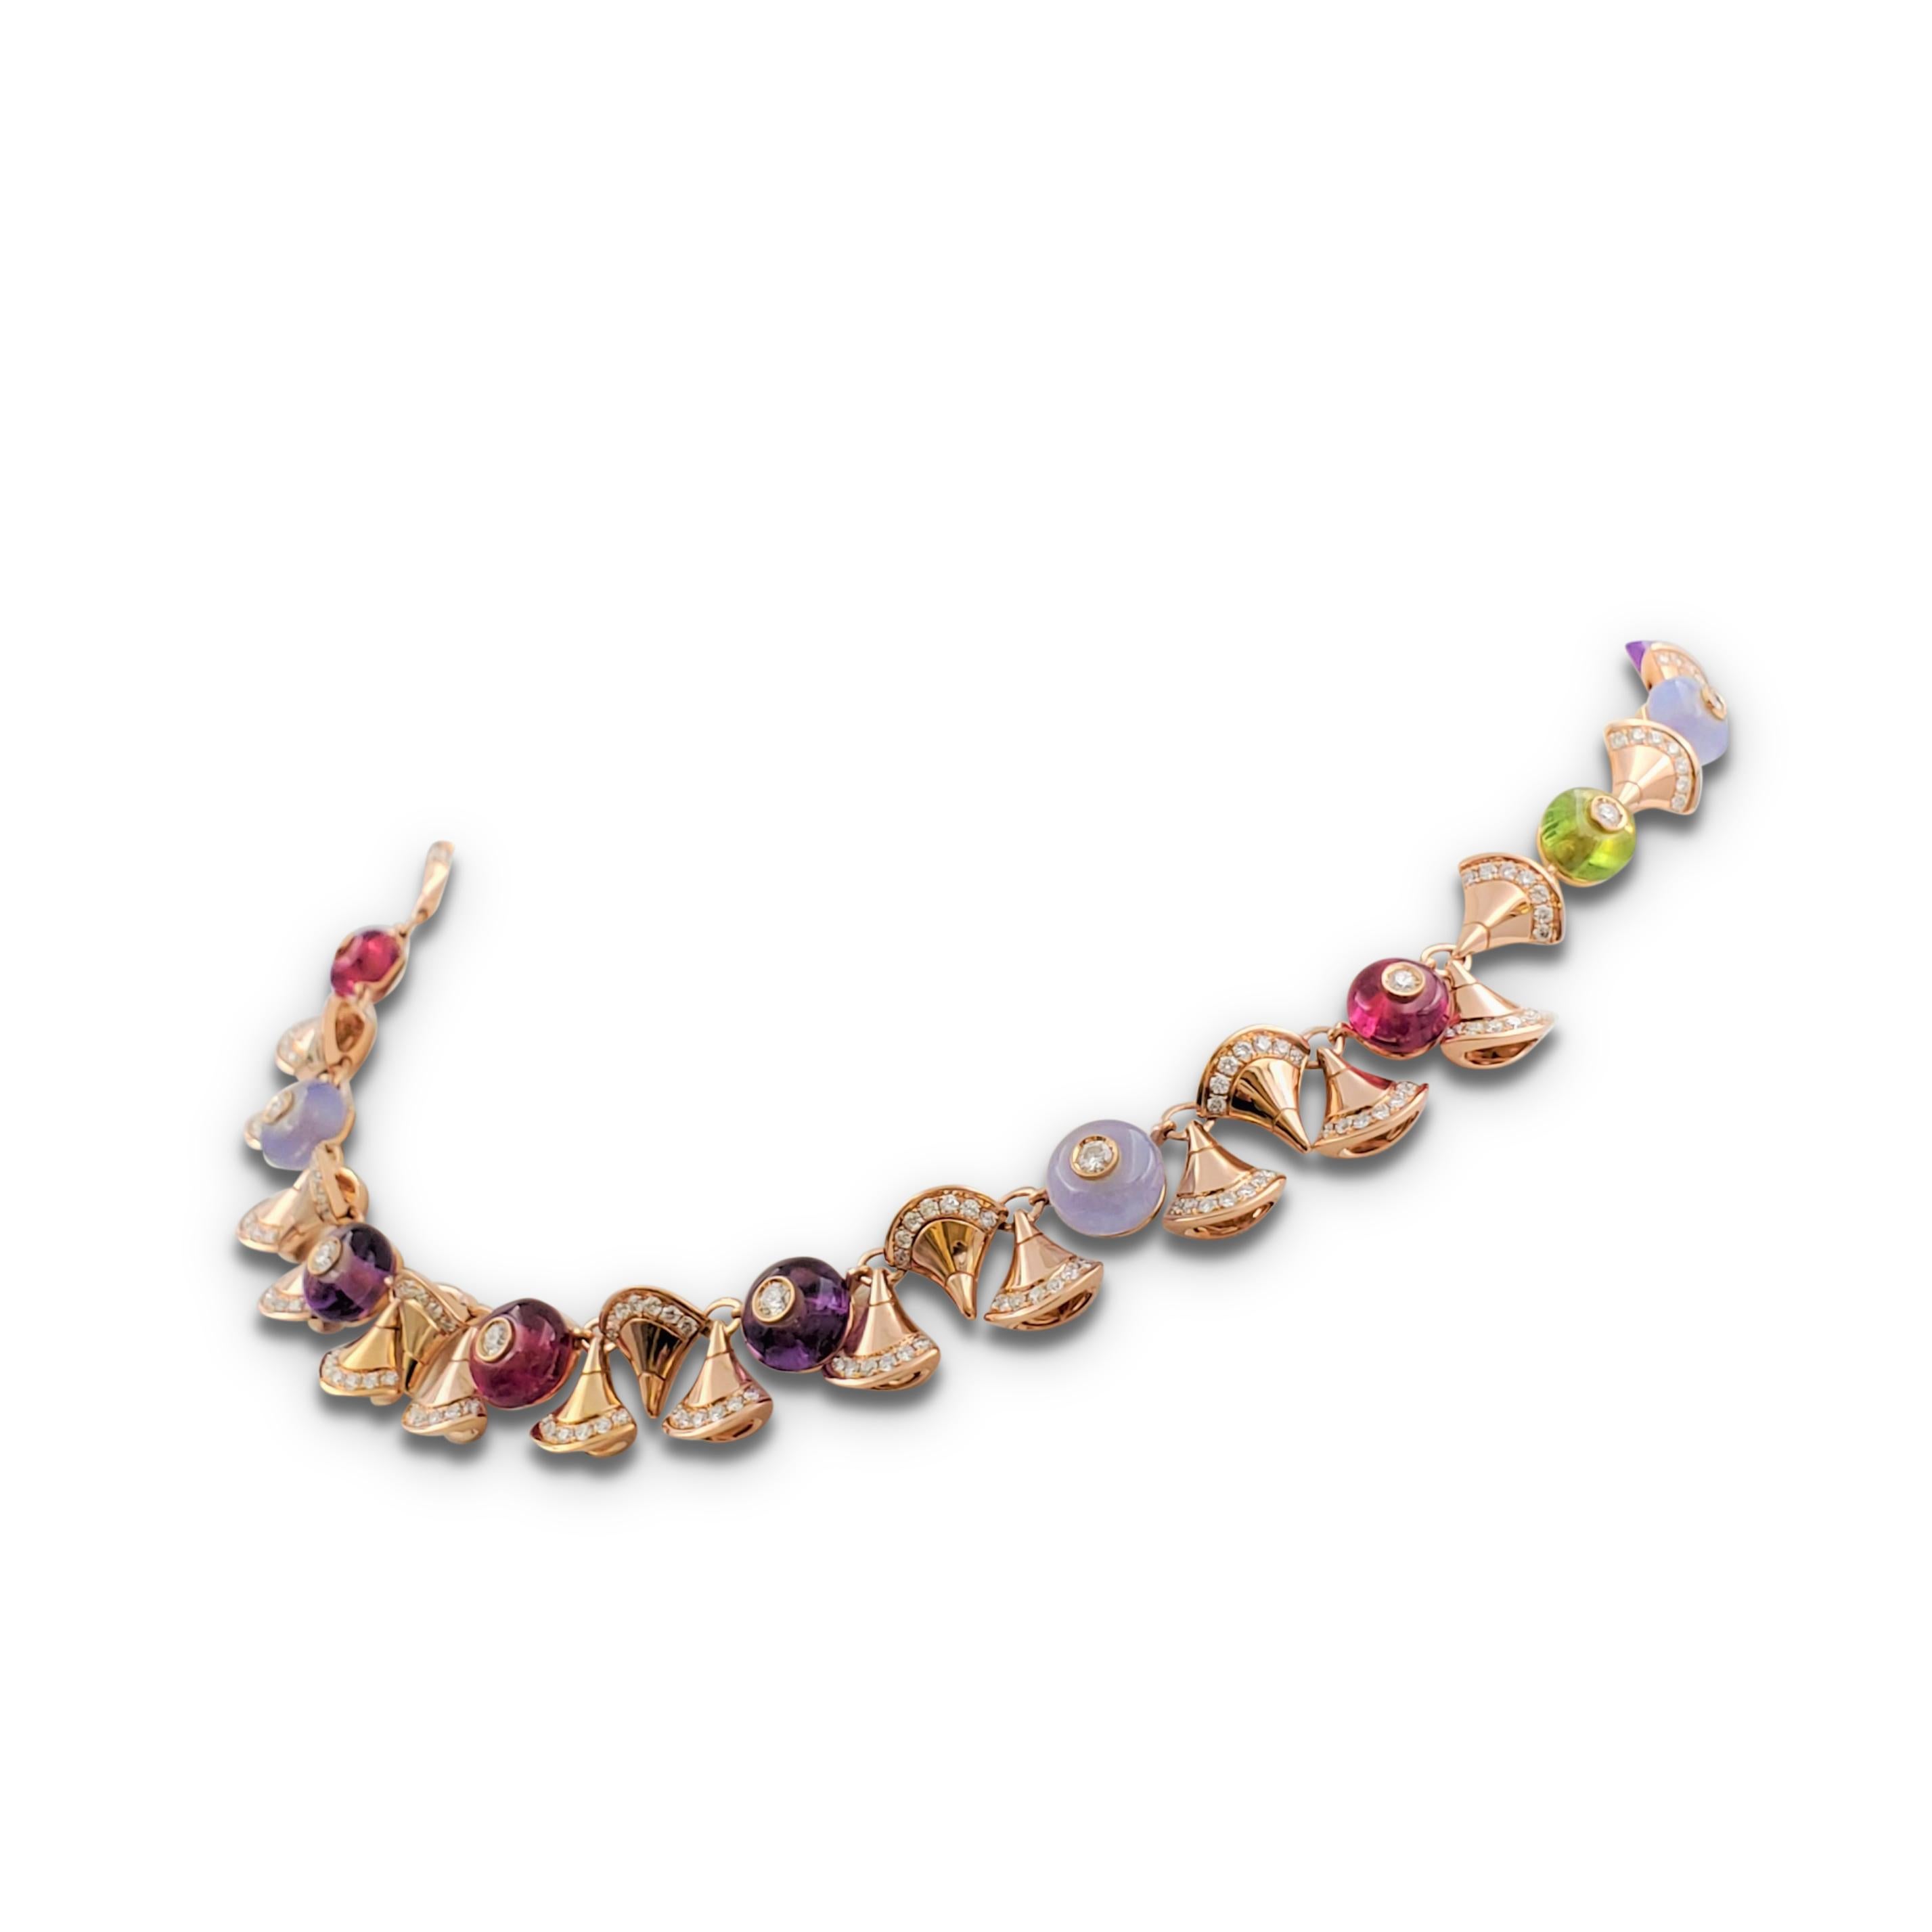 Authentic magnificent Bvlgari necklace from the 'Diva's Dream' collection center on dancing fan-shaped elements crafted in 18 karat rose gold pave set with an estimated 2.48 carats of round brilliant cut diamonds (E-F, VS). The necklace is adorned